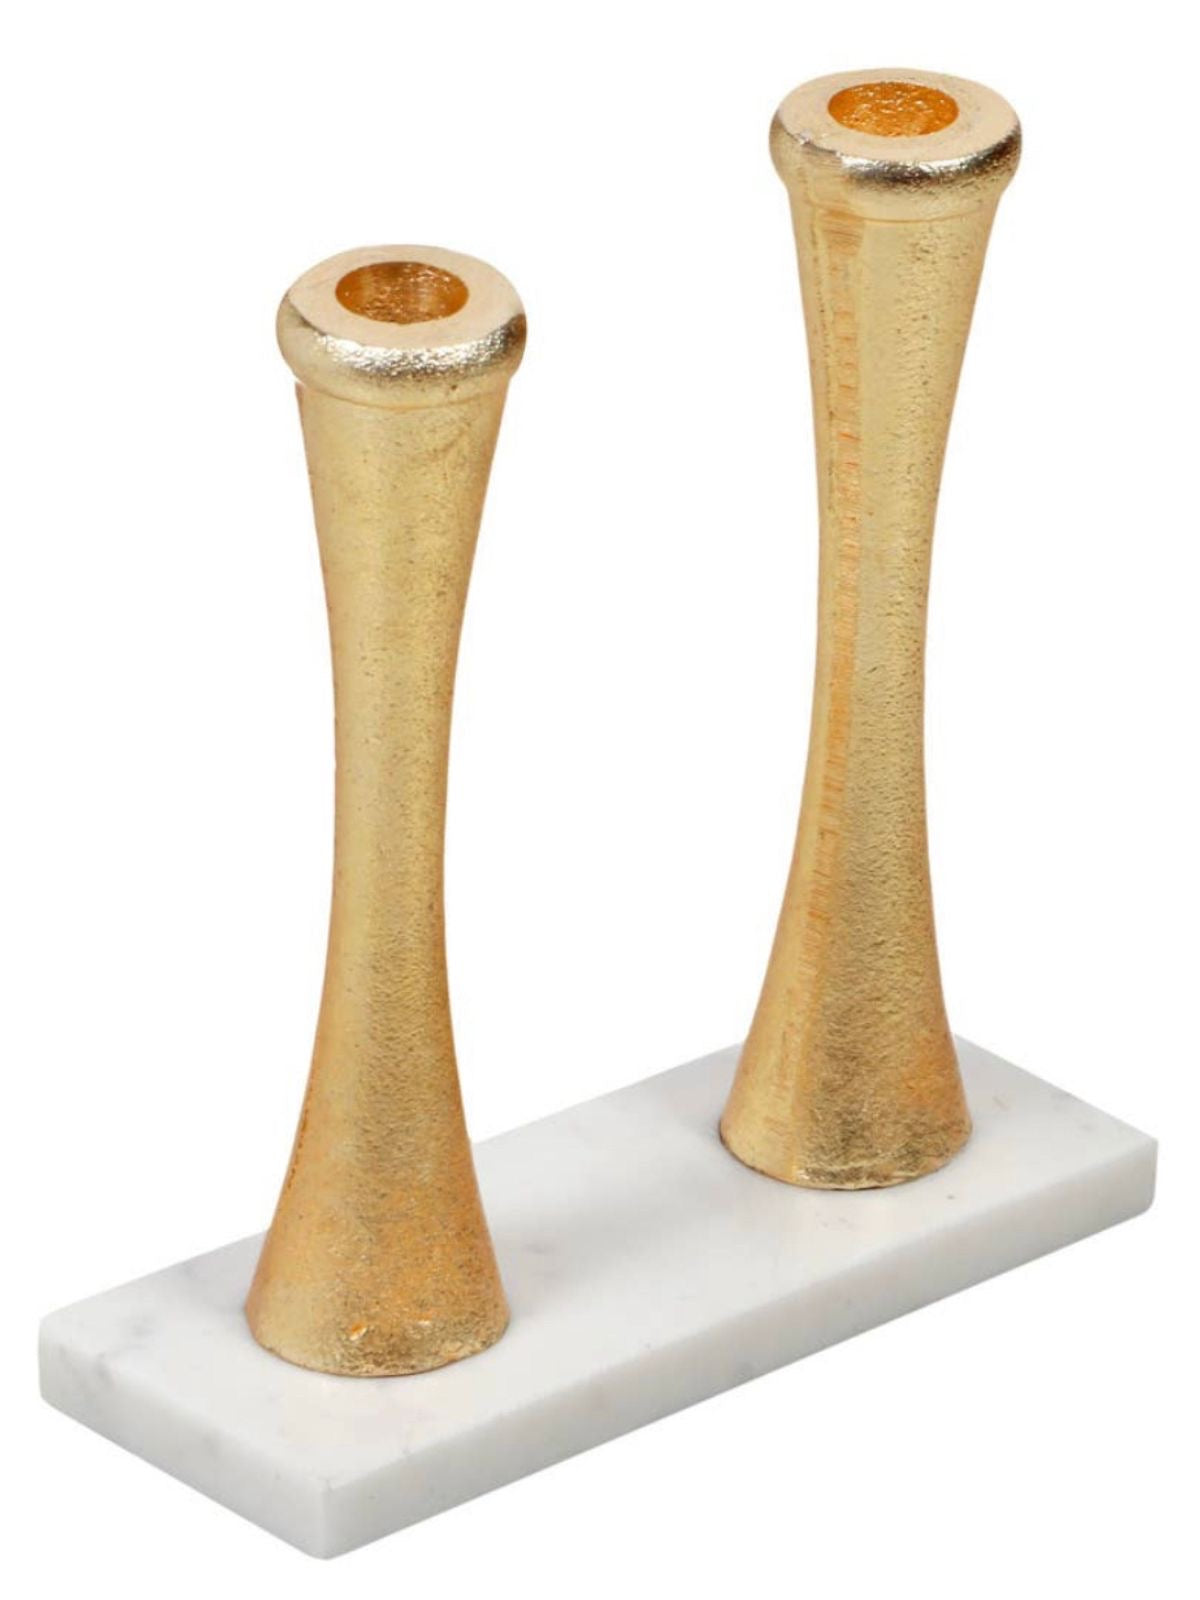 8L x 8.2H inch Marble Candlestick Holder With 2 Gold Brass Holders - KYA Home Decor. 